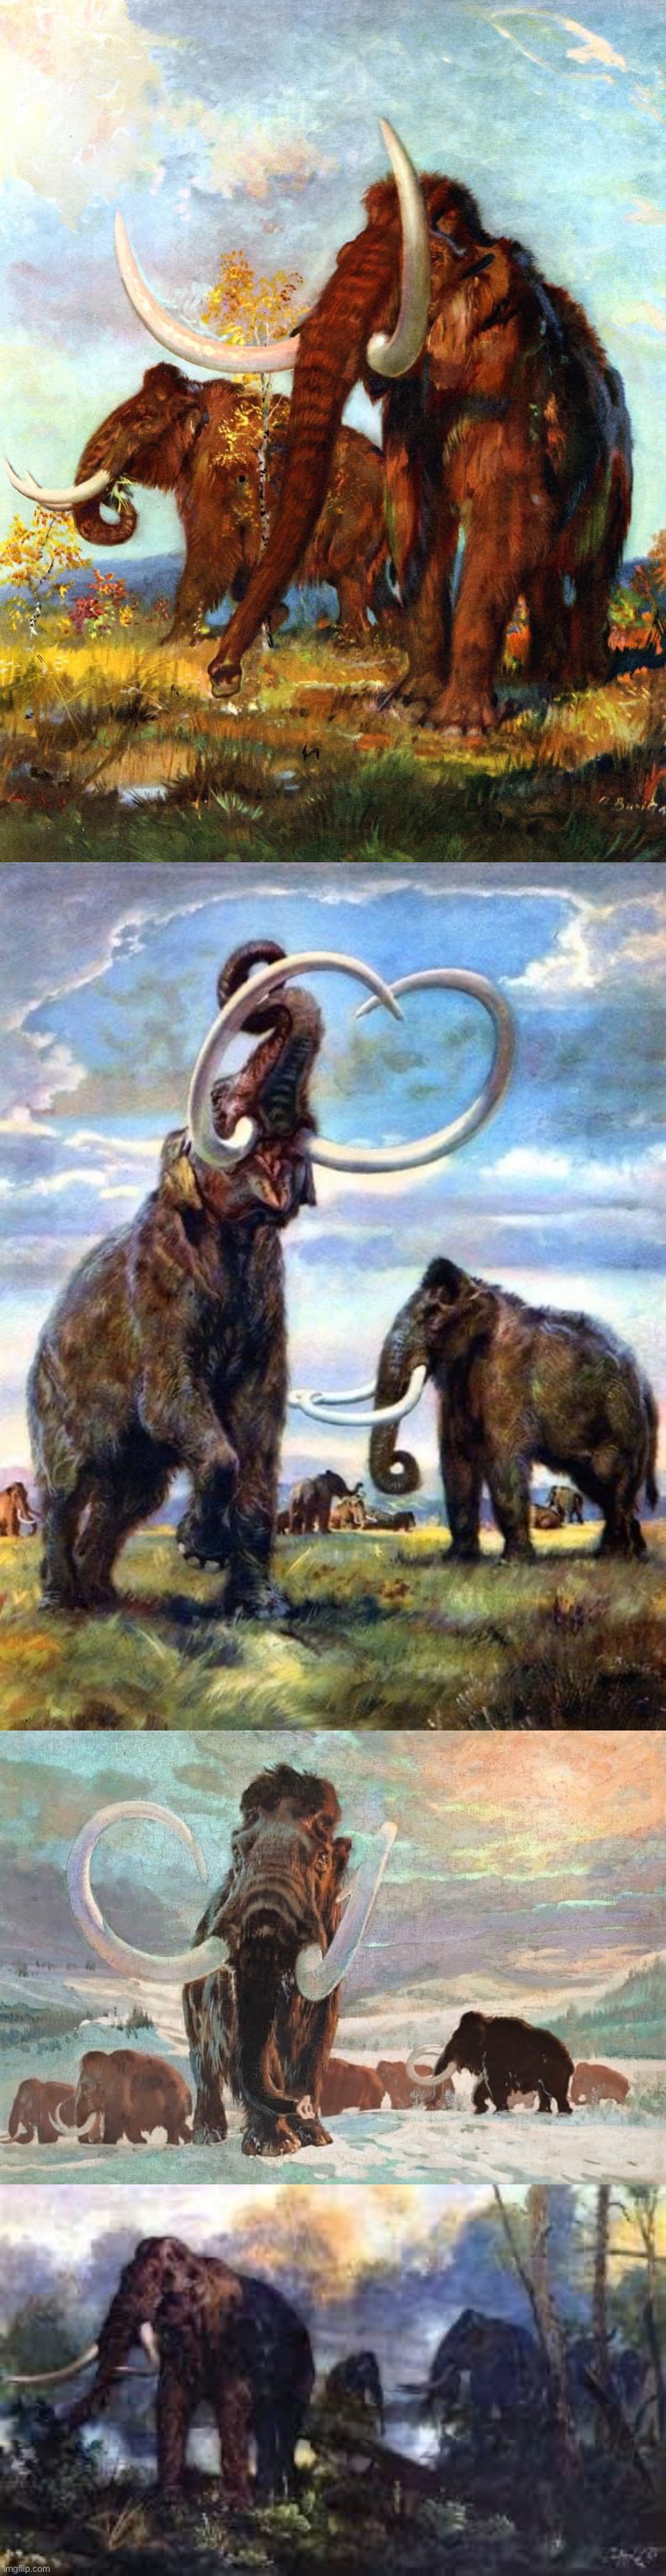 This is not a campaign ad, I just thought you might like to see some Woolly Mammoth art. Have a pleasant day. #VoteSumerParty | image tagged in woolly mammoths,not a campaign ad,vote,sumer,party,vote sumer party | made w/ Imgflip meme maker